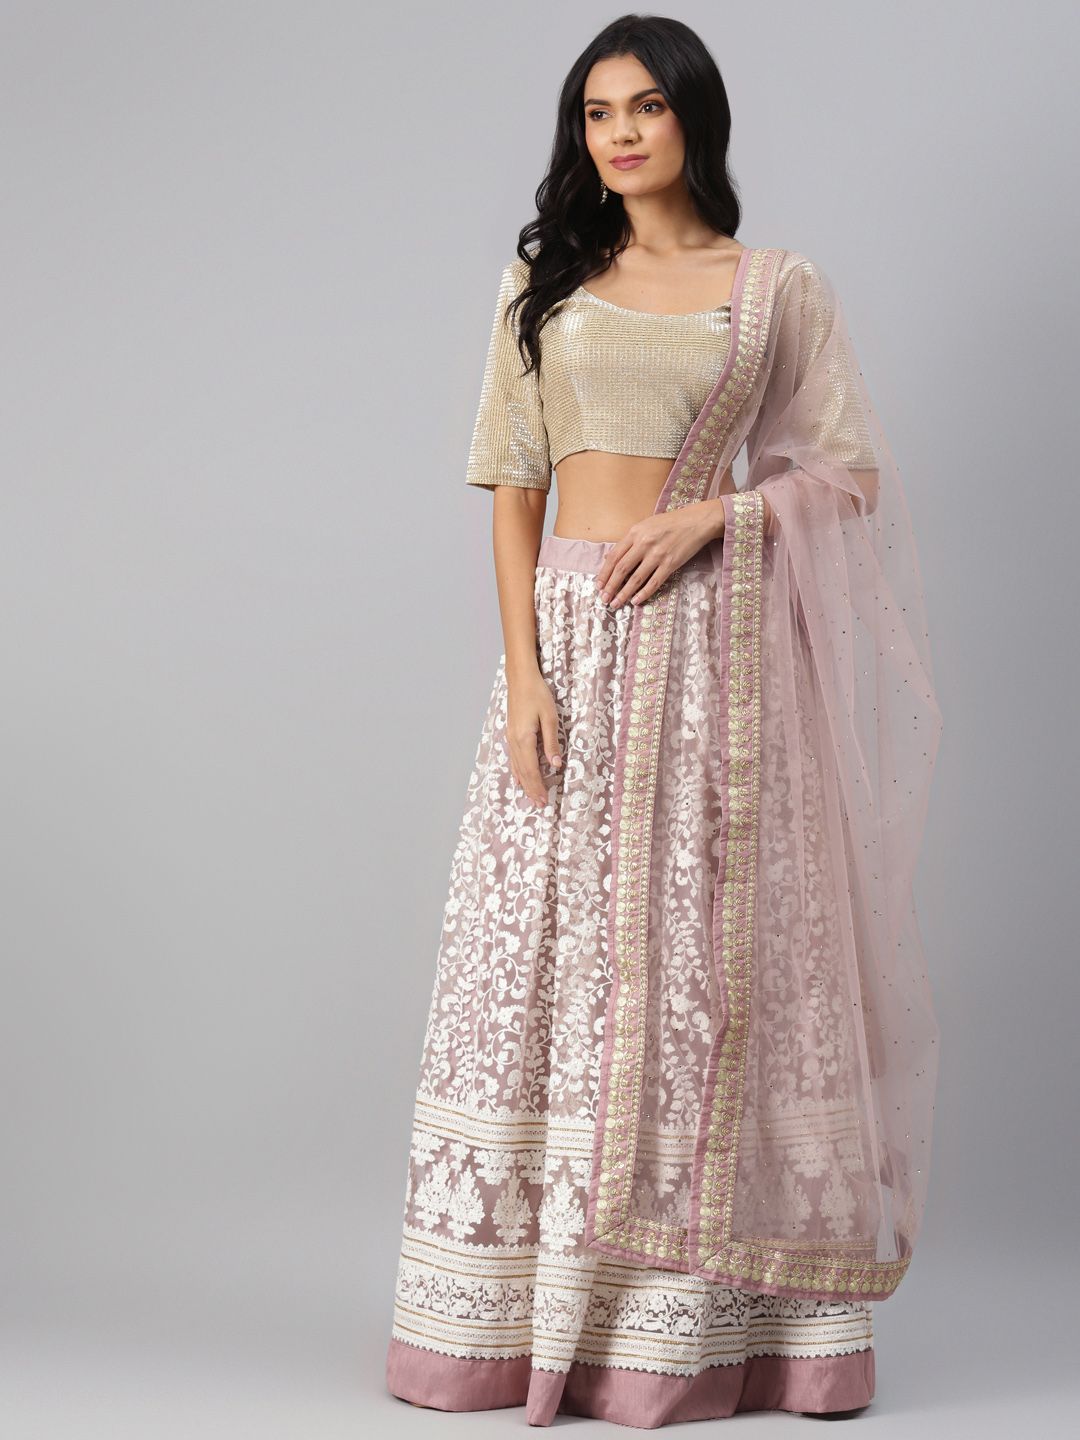 Readiprint Fashions Mauve & Gold-Toned Woven Design Semi-Stitched Lehenga & Unstitched Blouse with Dupatta Price in India